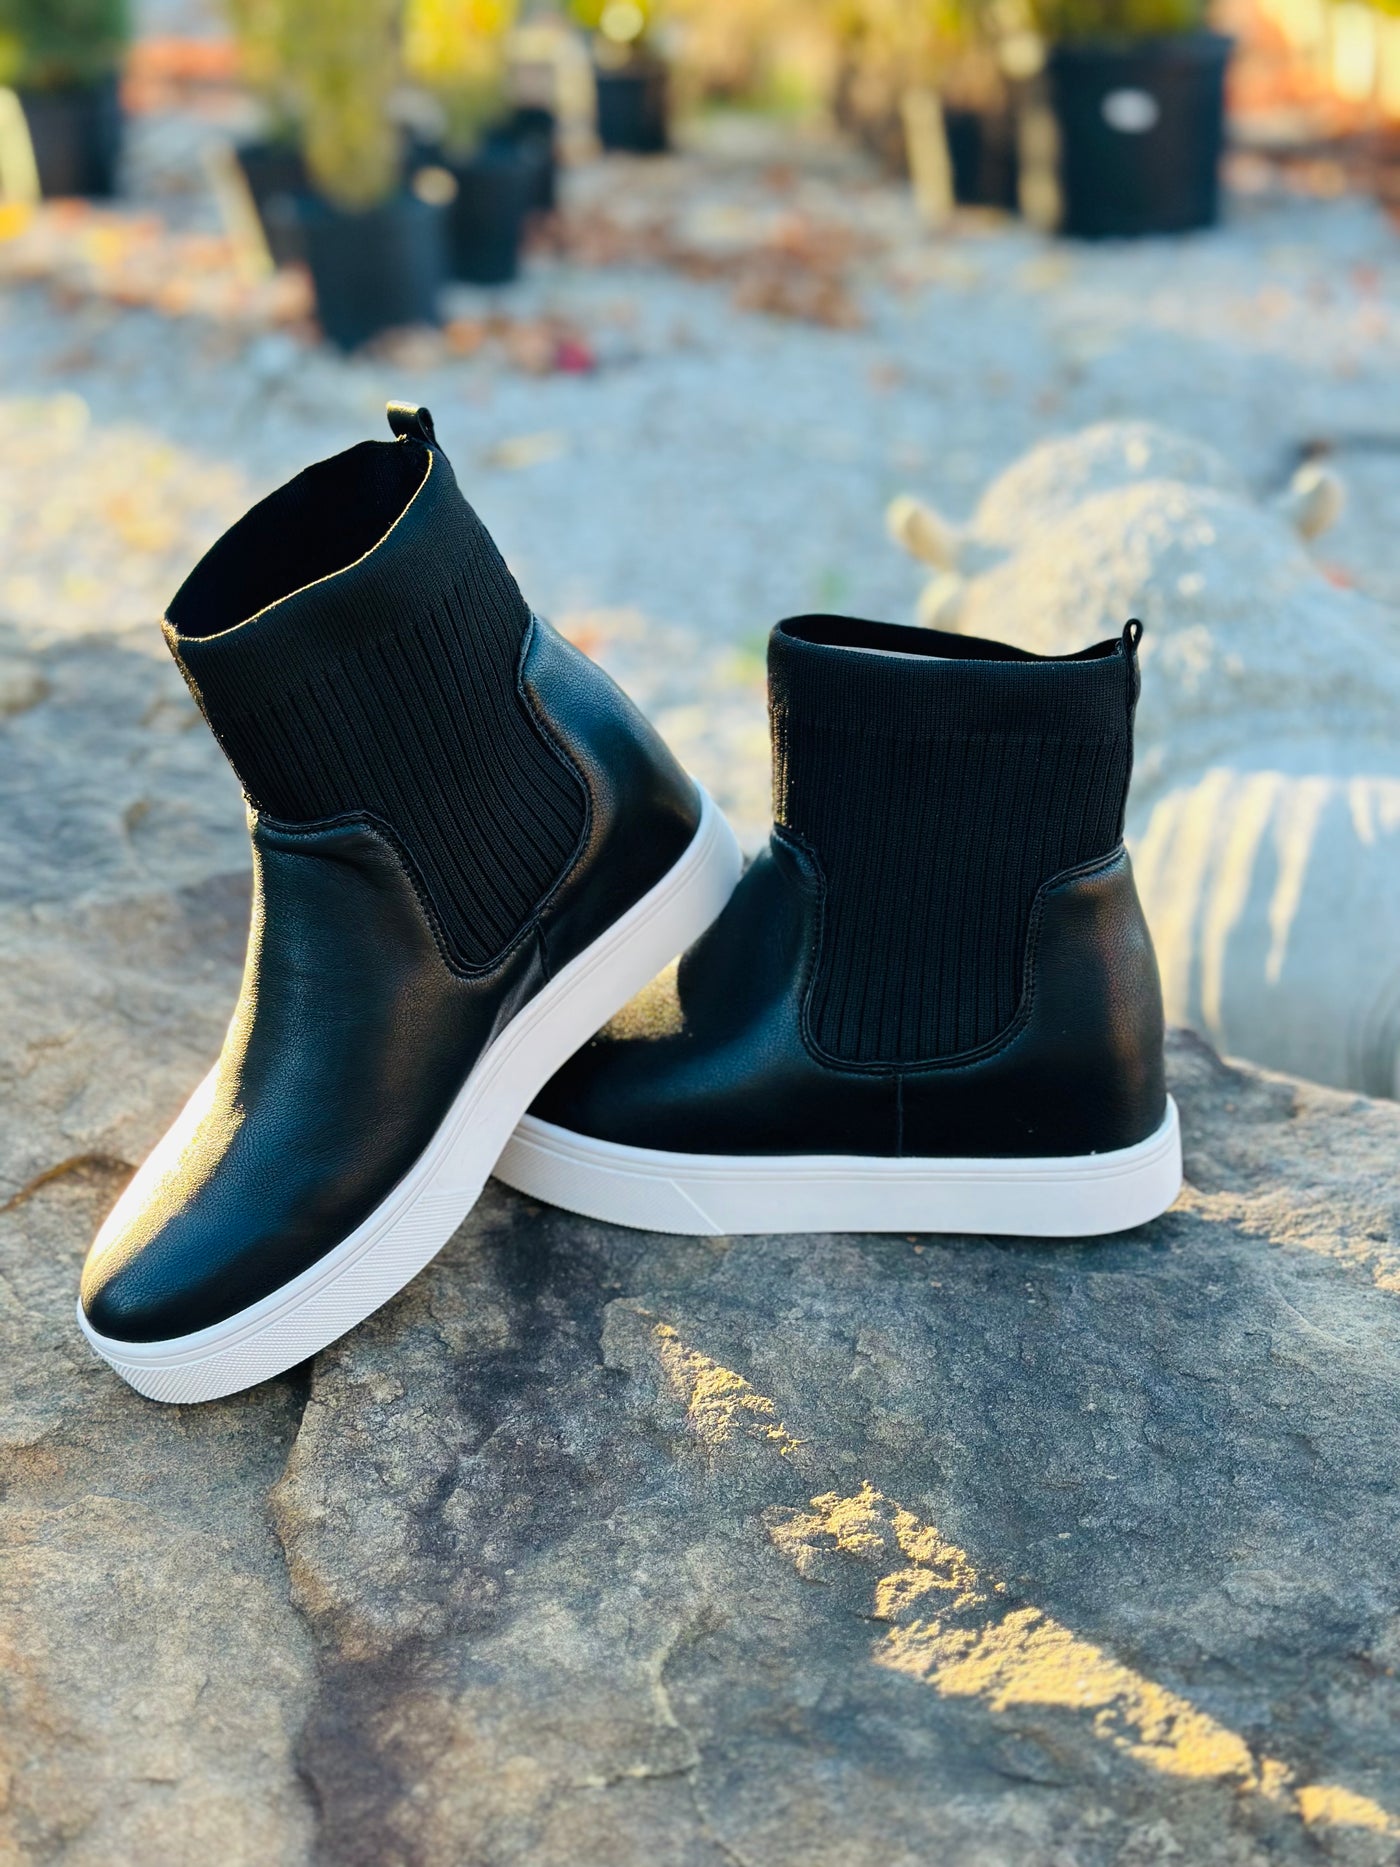 Corkys "Sweater Weather" Boots in Black Final Sale